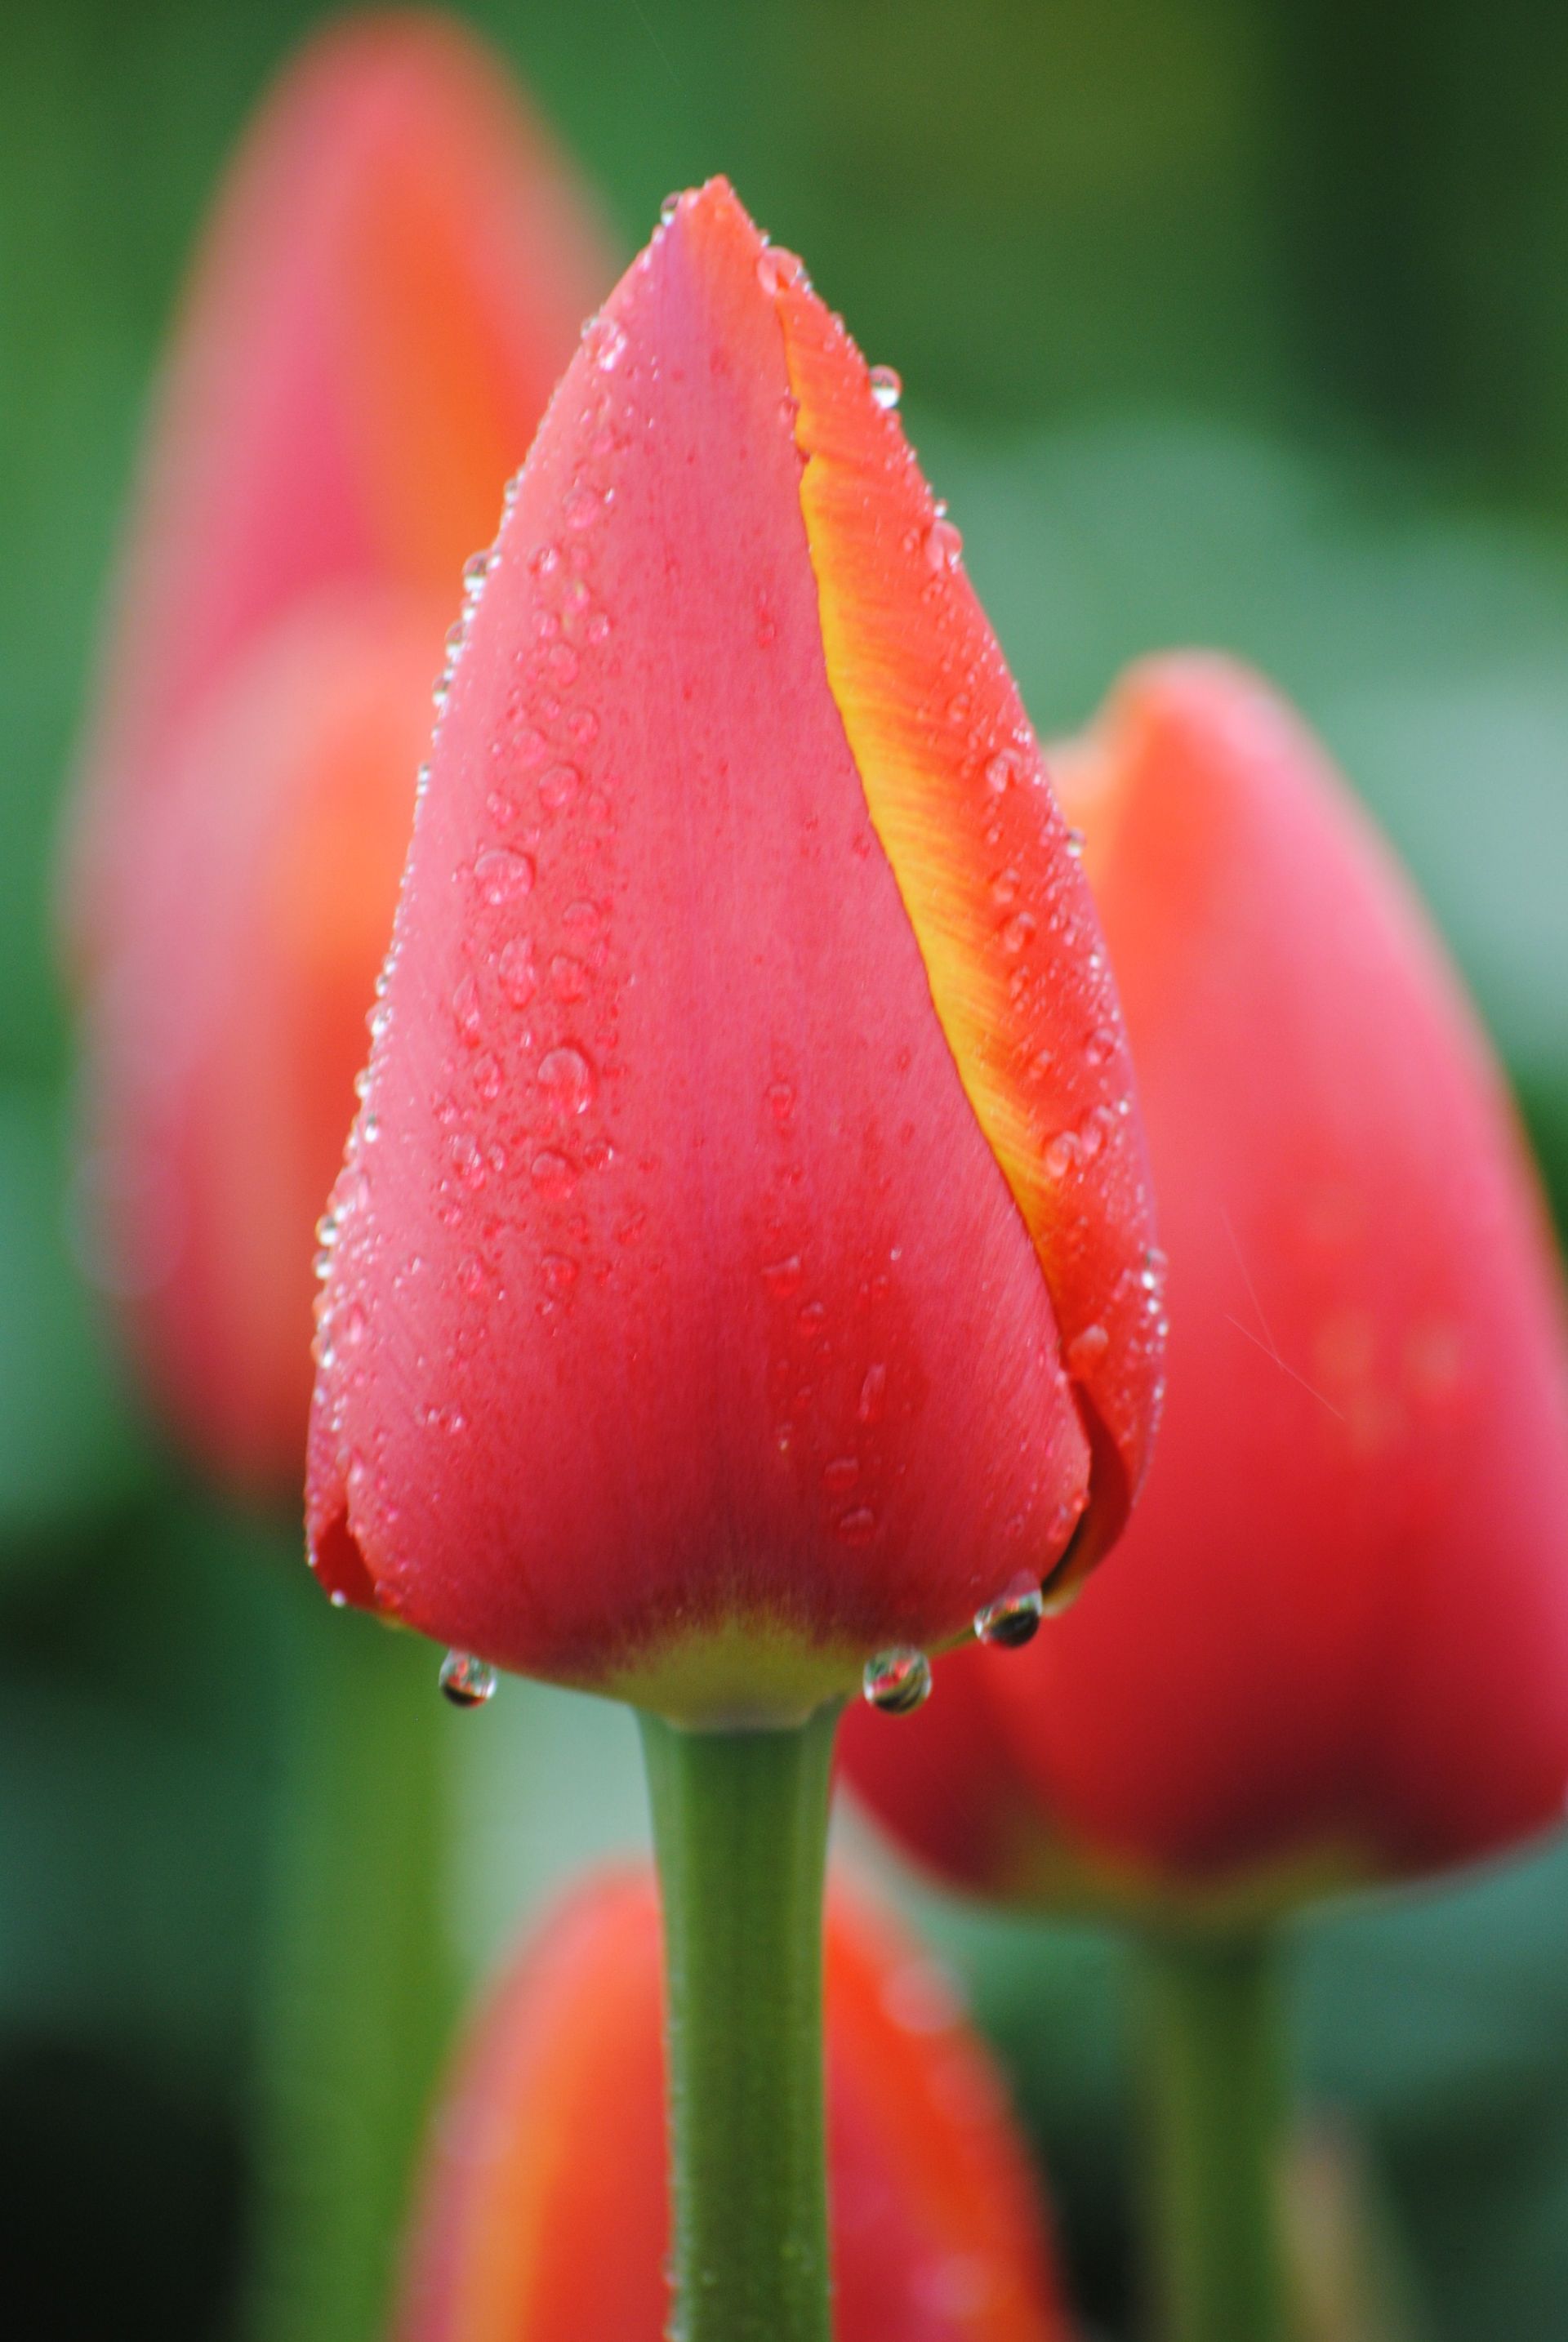 Some spring tulips with water drops.